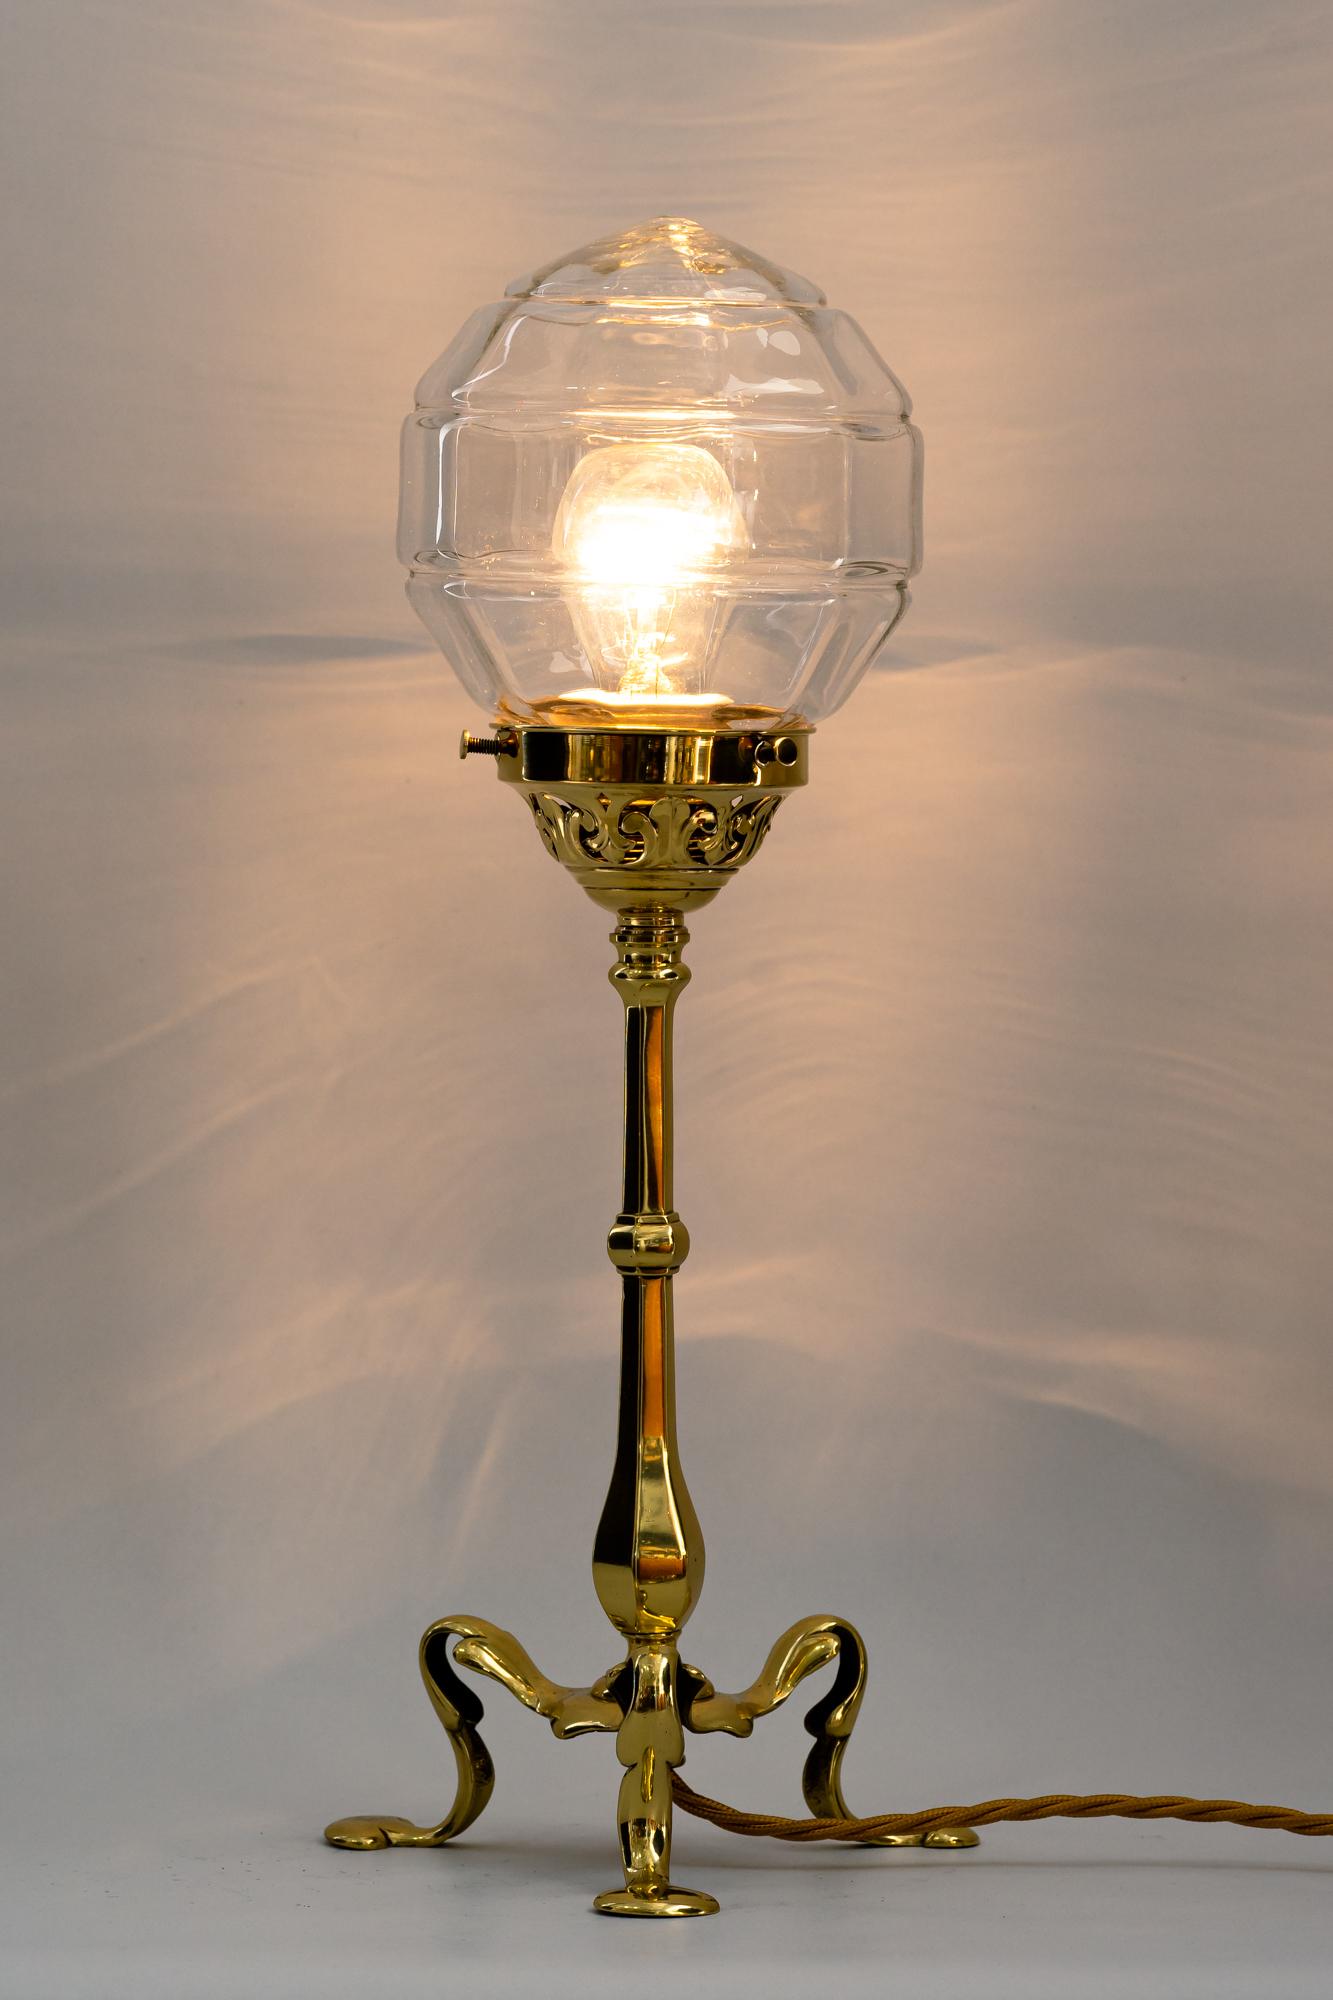 Early 20th Century Jugendstil Table Lamp with Original Glass Shade, Vienna, Around 1910s